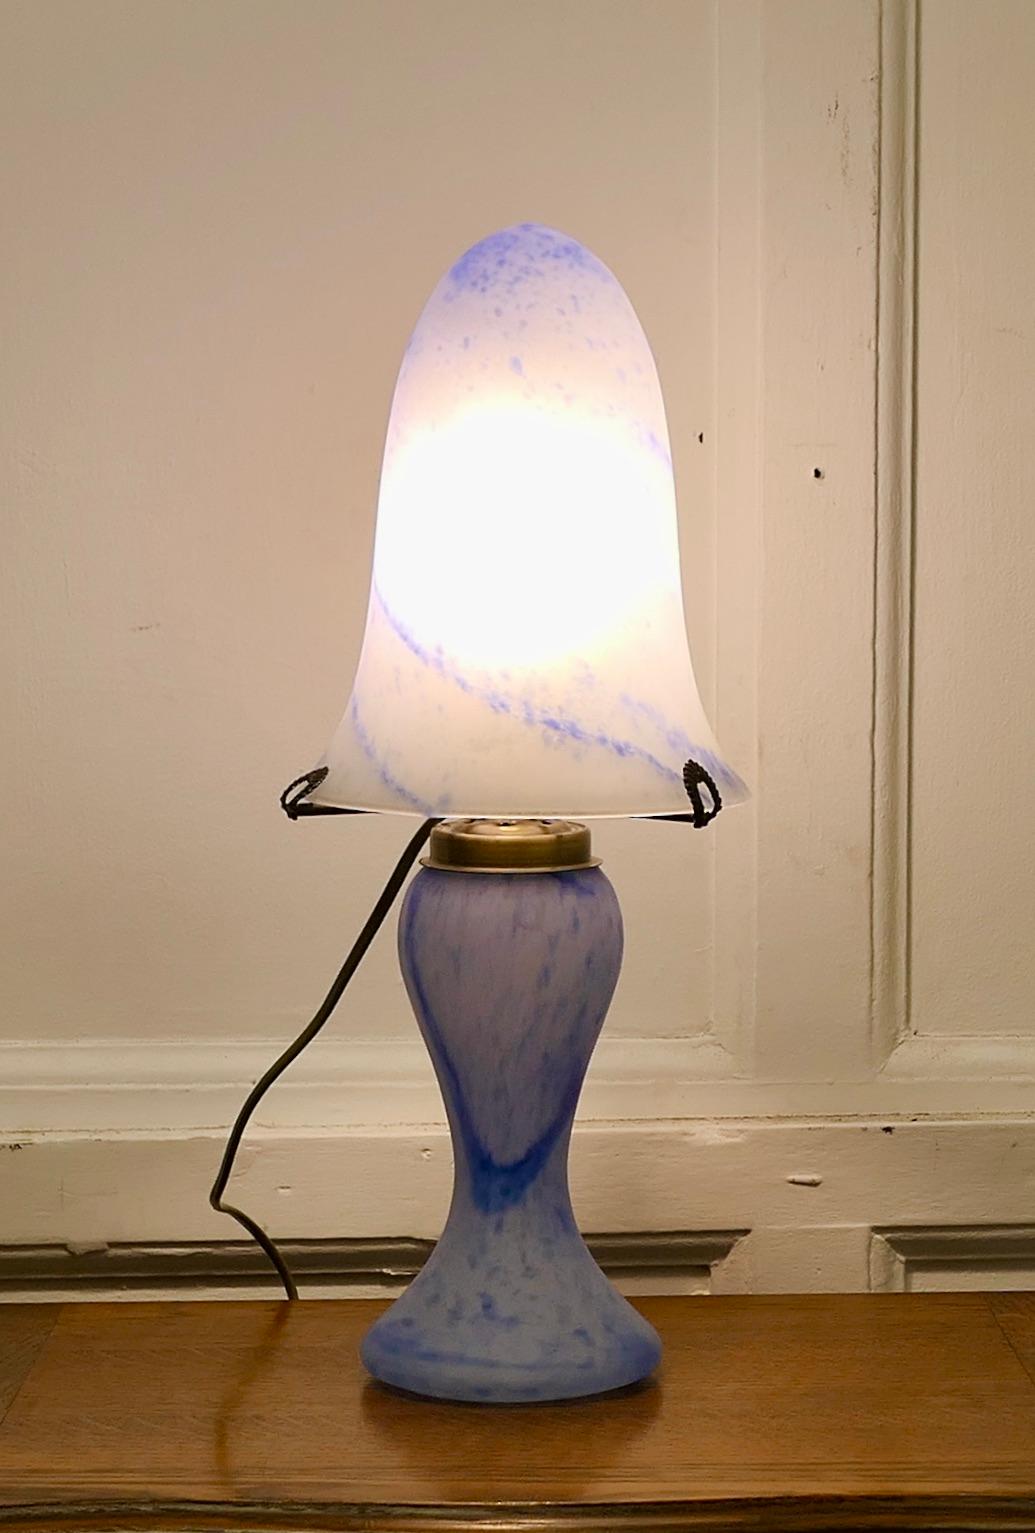  Art Deco Style End of Day Blue Glass Lamp and Glass Shade

This is a very pretty piece, the base of the lamp has a vase shape and it is set off with a pointed mushroom shaped shade, these are made in shades of blue end of day glass 
All the wiring